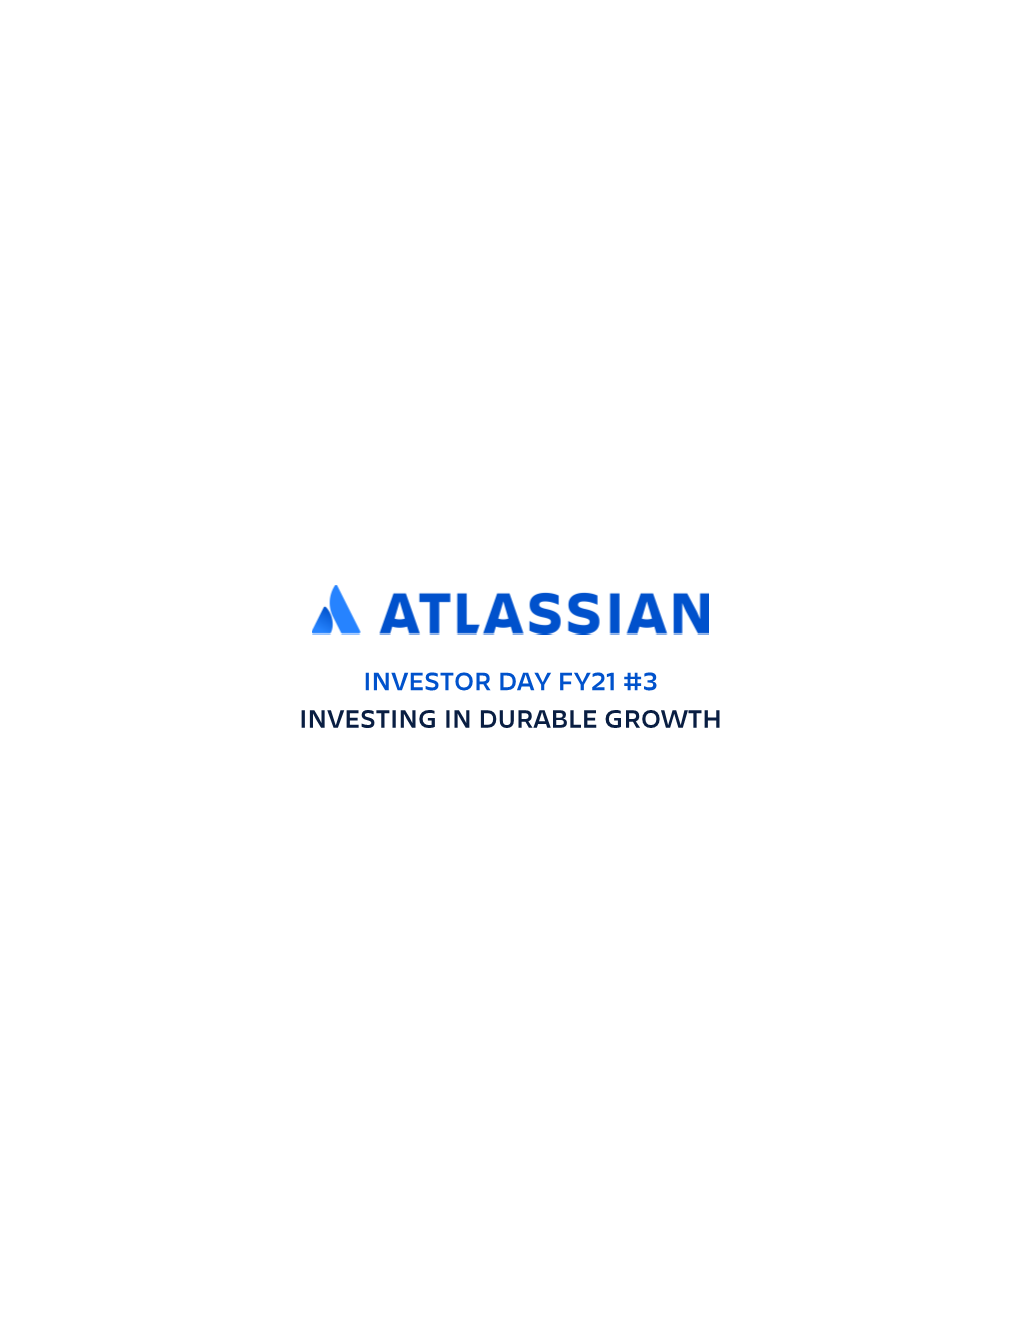 Atlassian Has Unique Competitive Advantages in R&D and GTM That Let Us Take a Long-Term Approach to Create Lasting Value for Customers